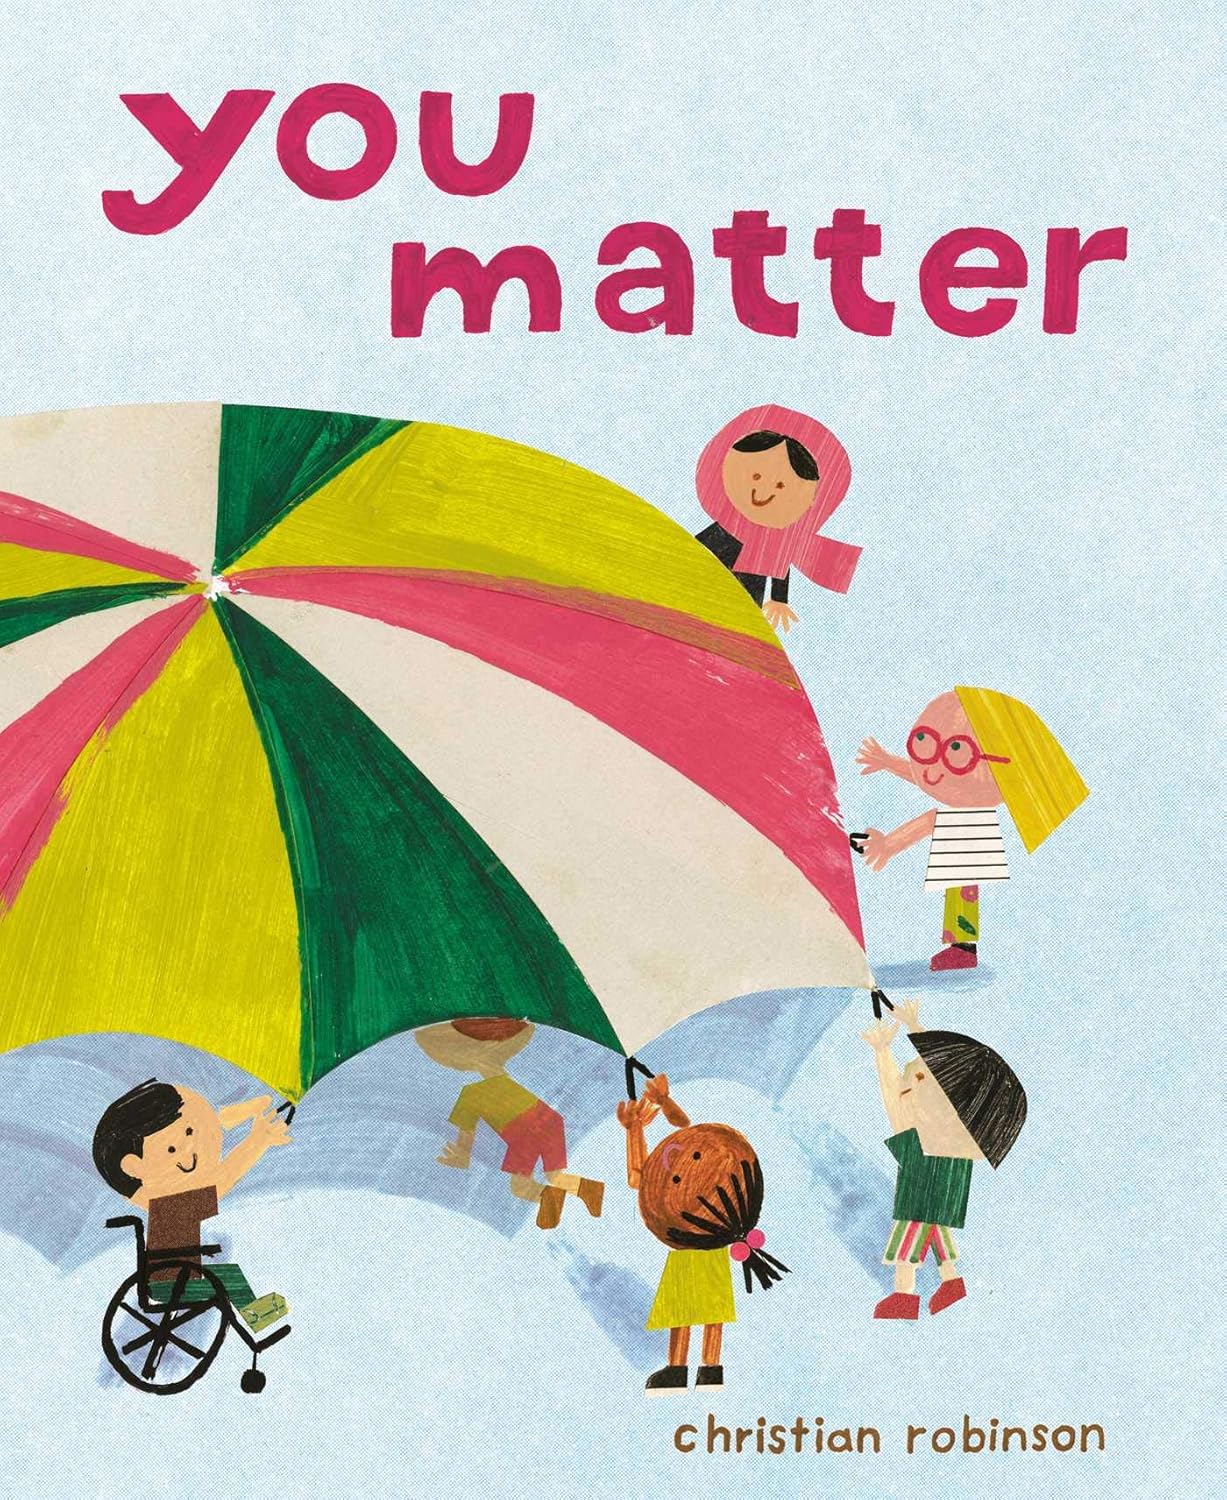 Image of "You Matter"